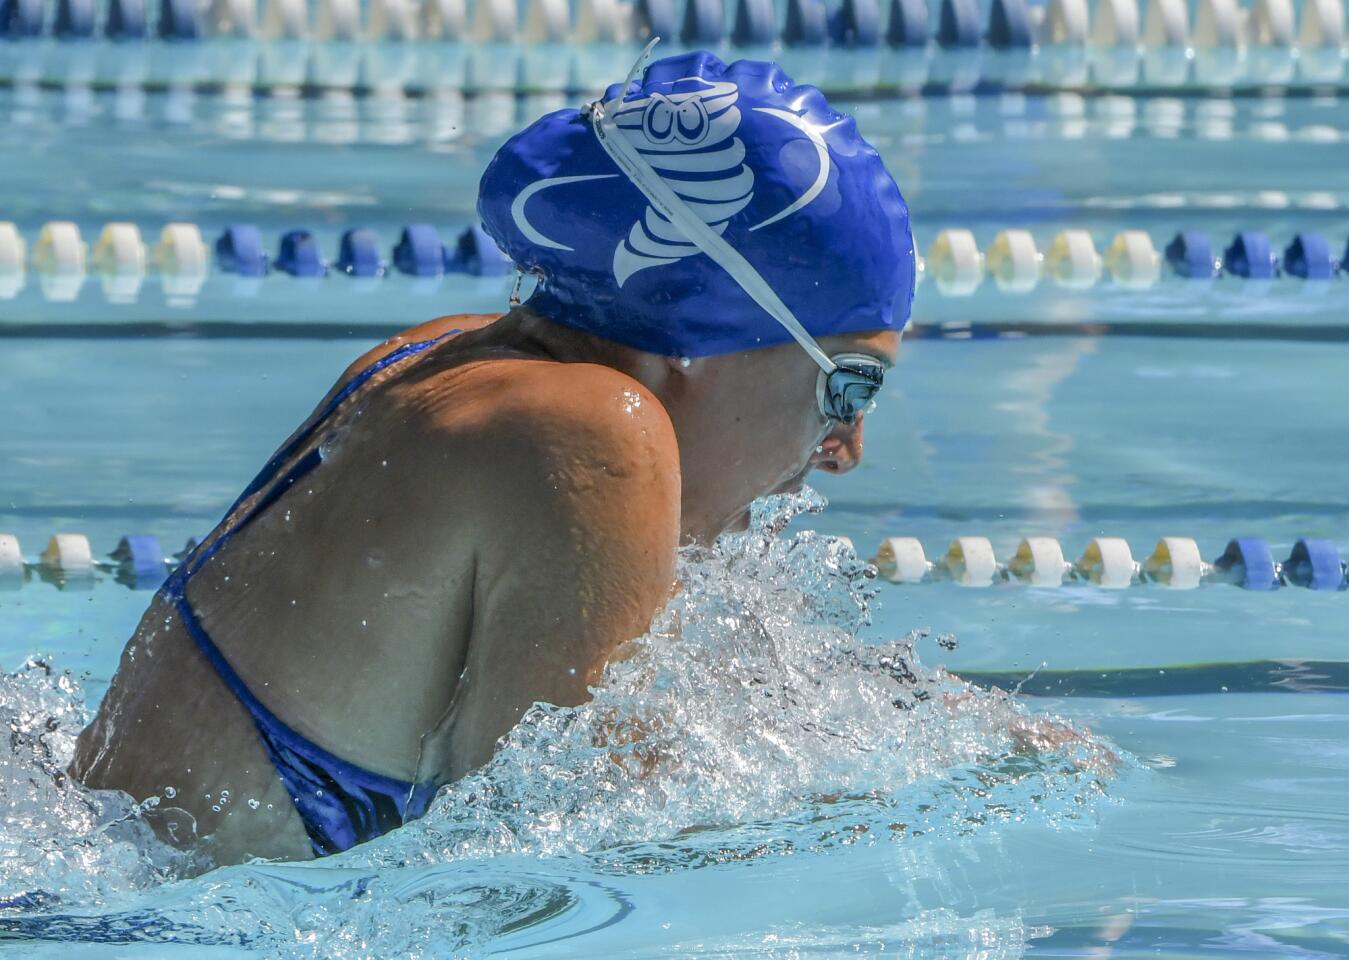 Clemens Crossing's Jessie Rothrock powers through the water in the 15-18 girls 50 yard breaststroke at the Columbia Neighborhood Swim League meet between host Clemens Crossing and Harper's Choice Saturday morning in Columbia.